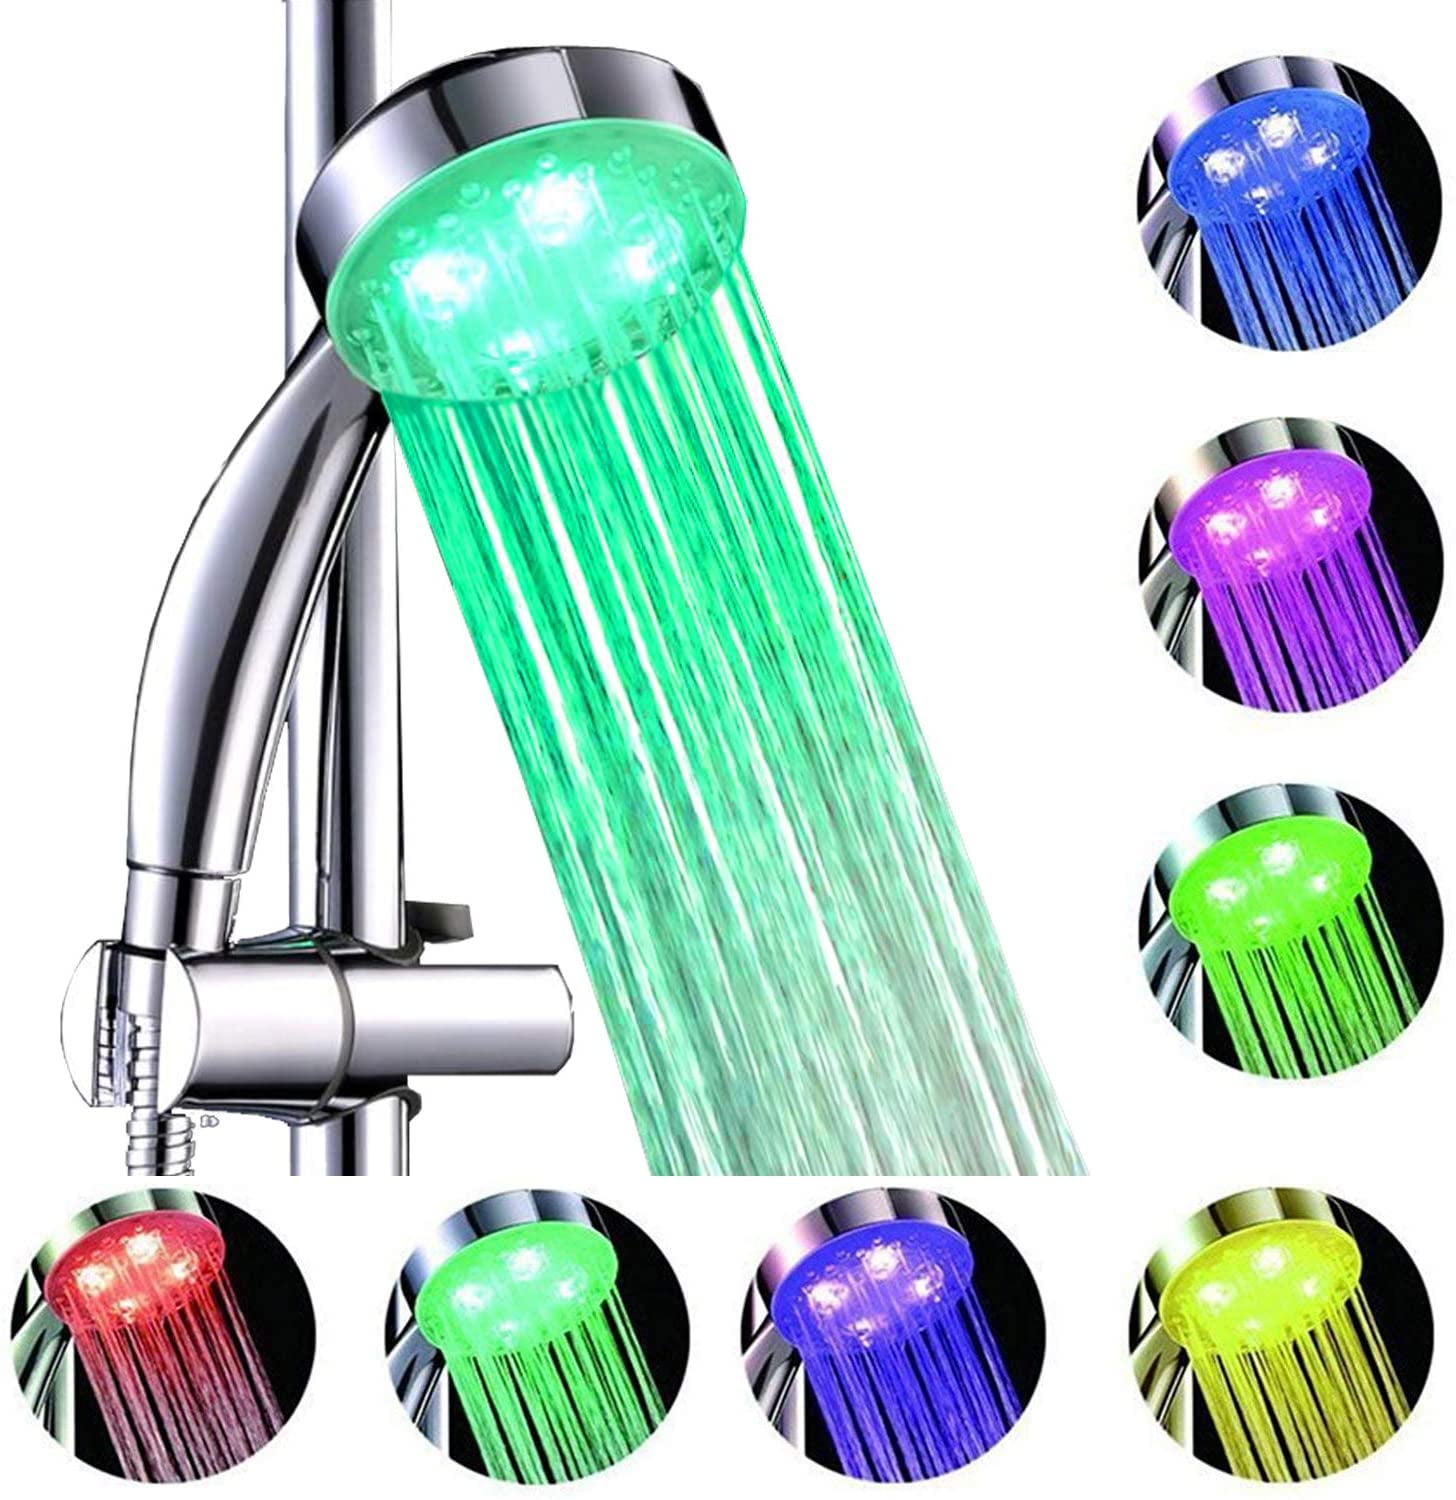 NEW Colorful Shower Head Home Bathroom 3/7 LED Colors Changing Water Glow Light 